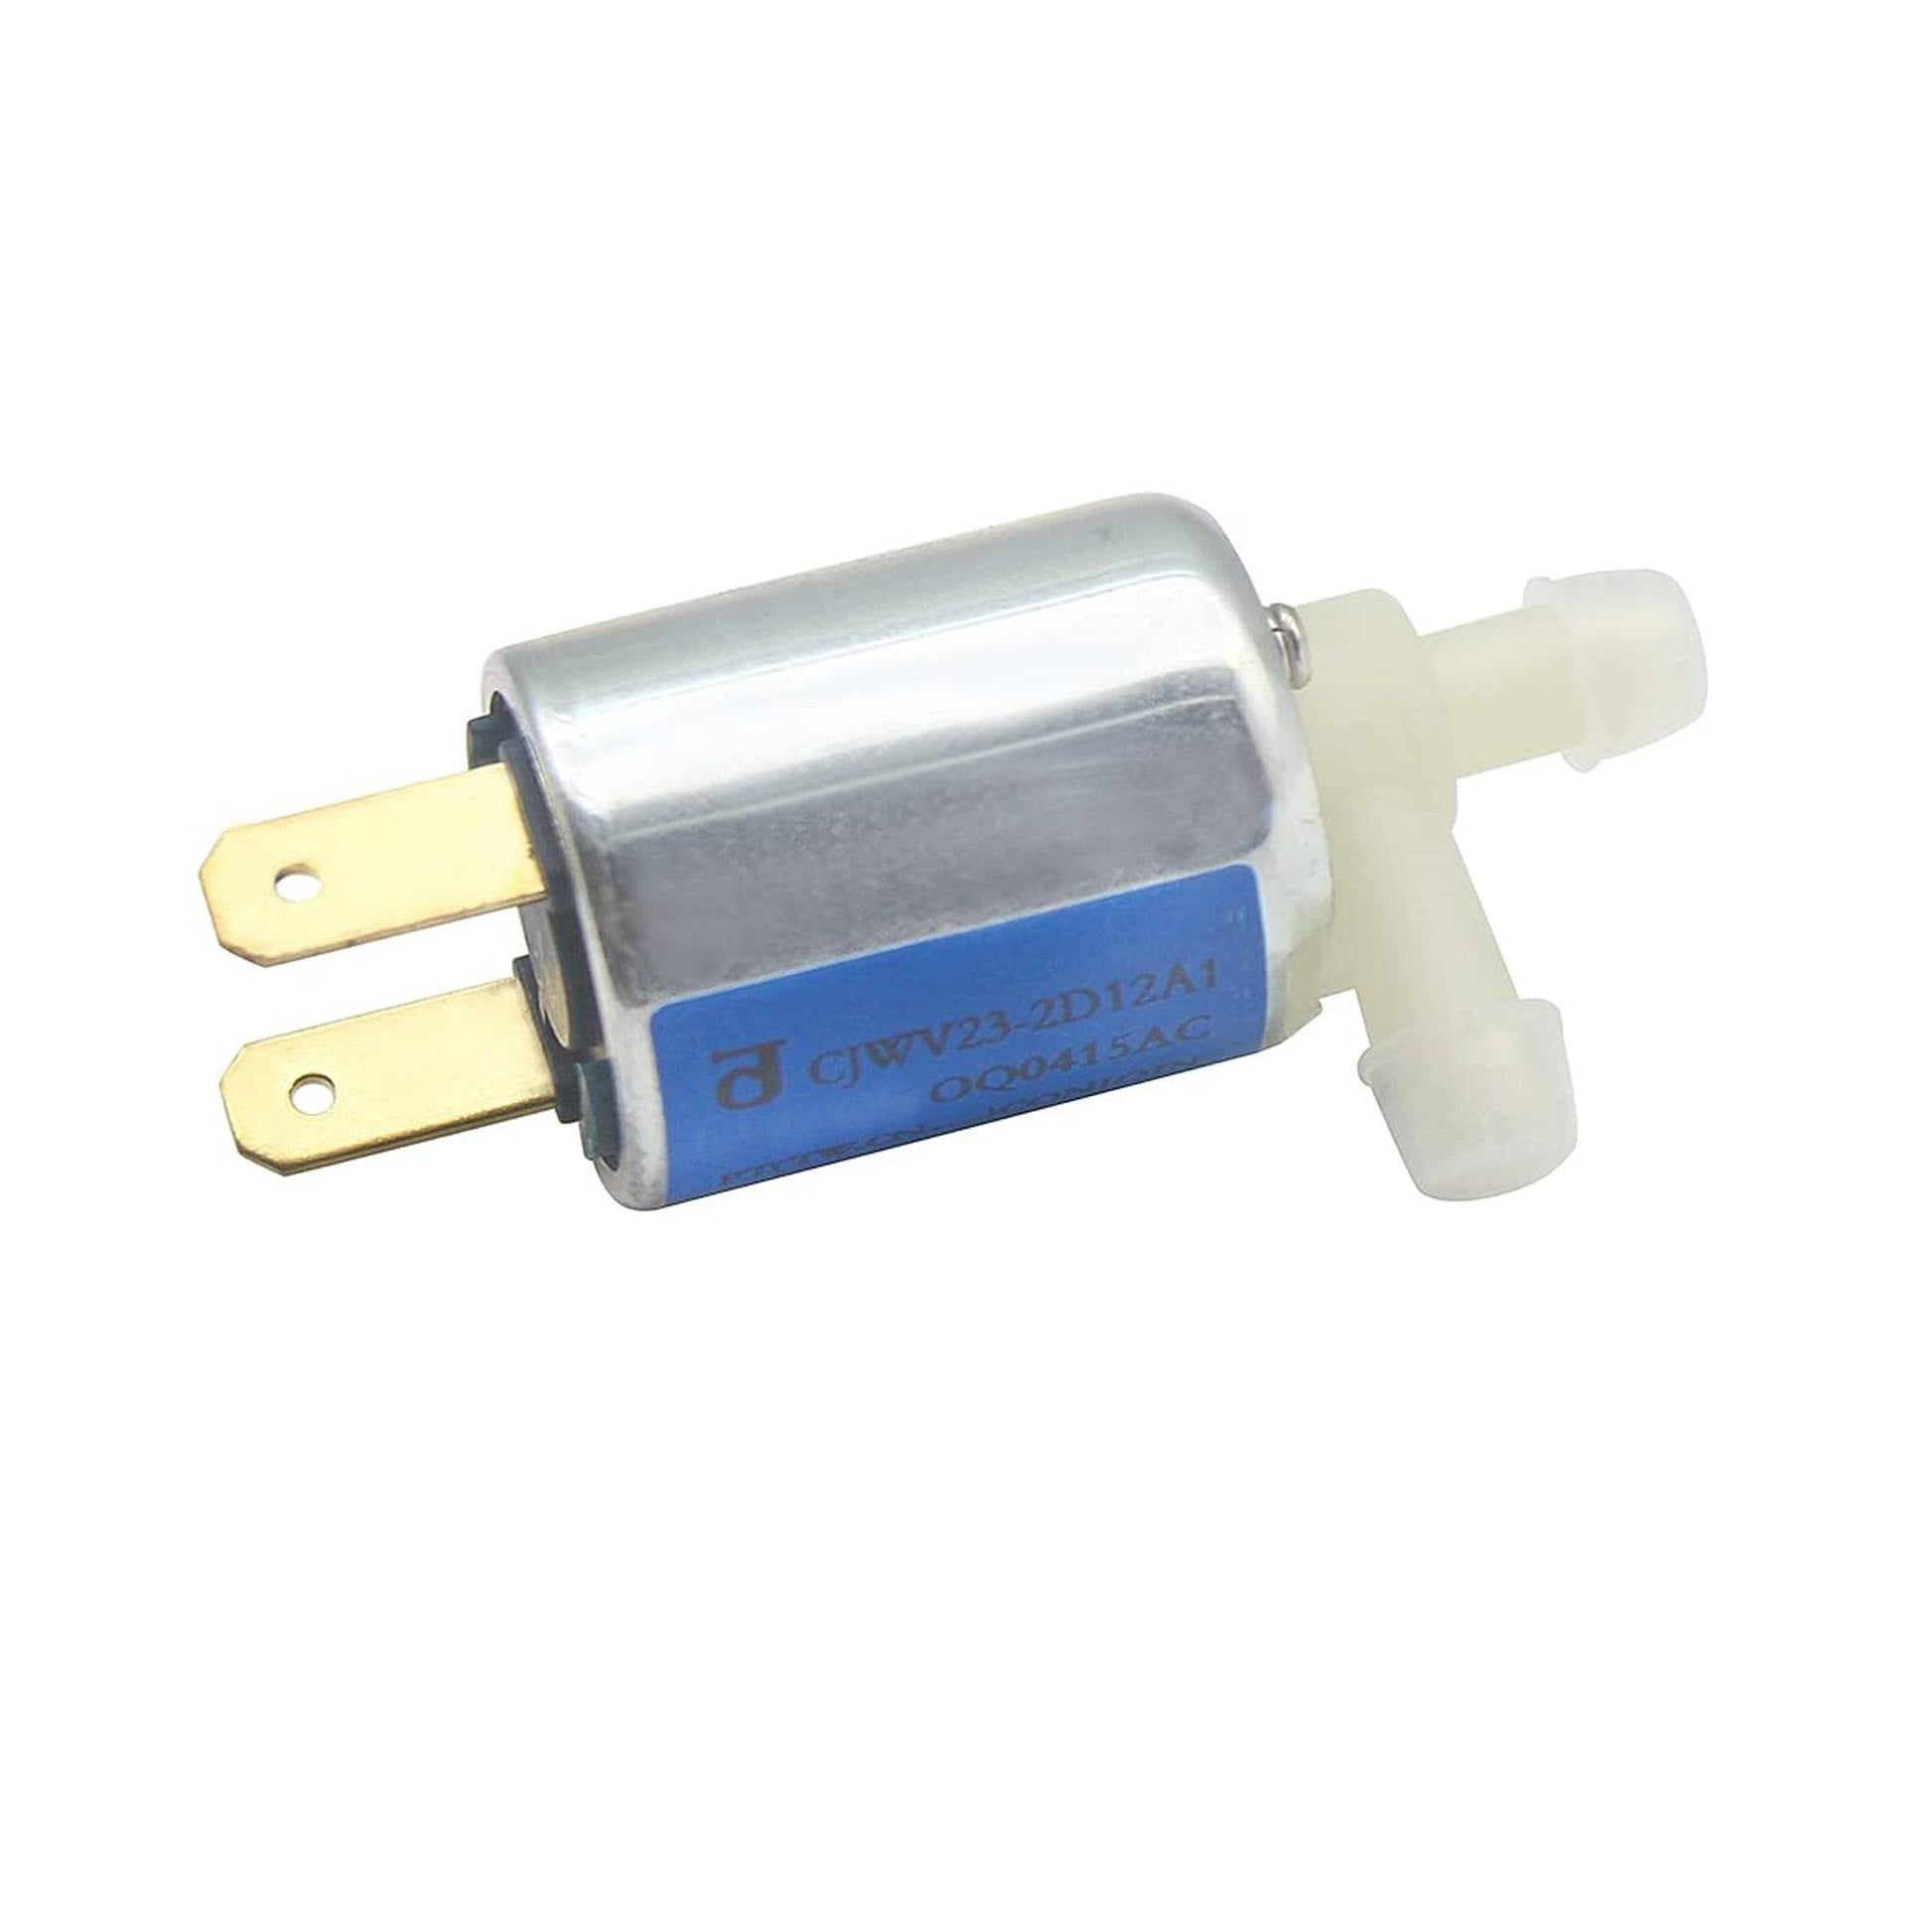 24V Mini Solenoid Valve for Water Air Gas - Normally Closed